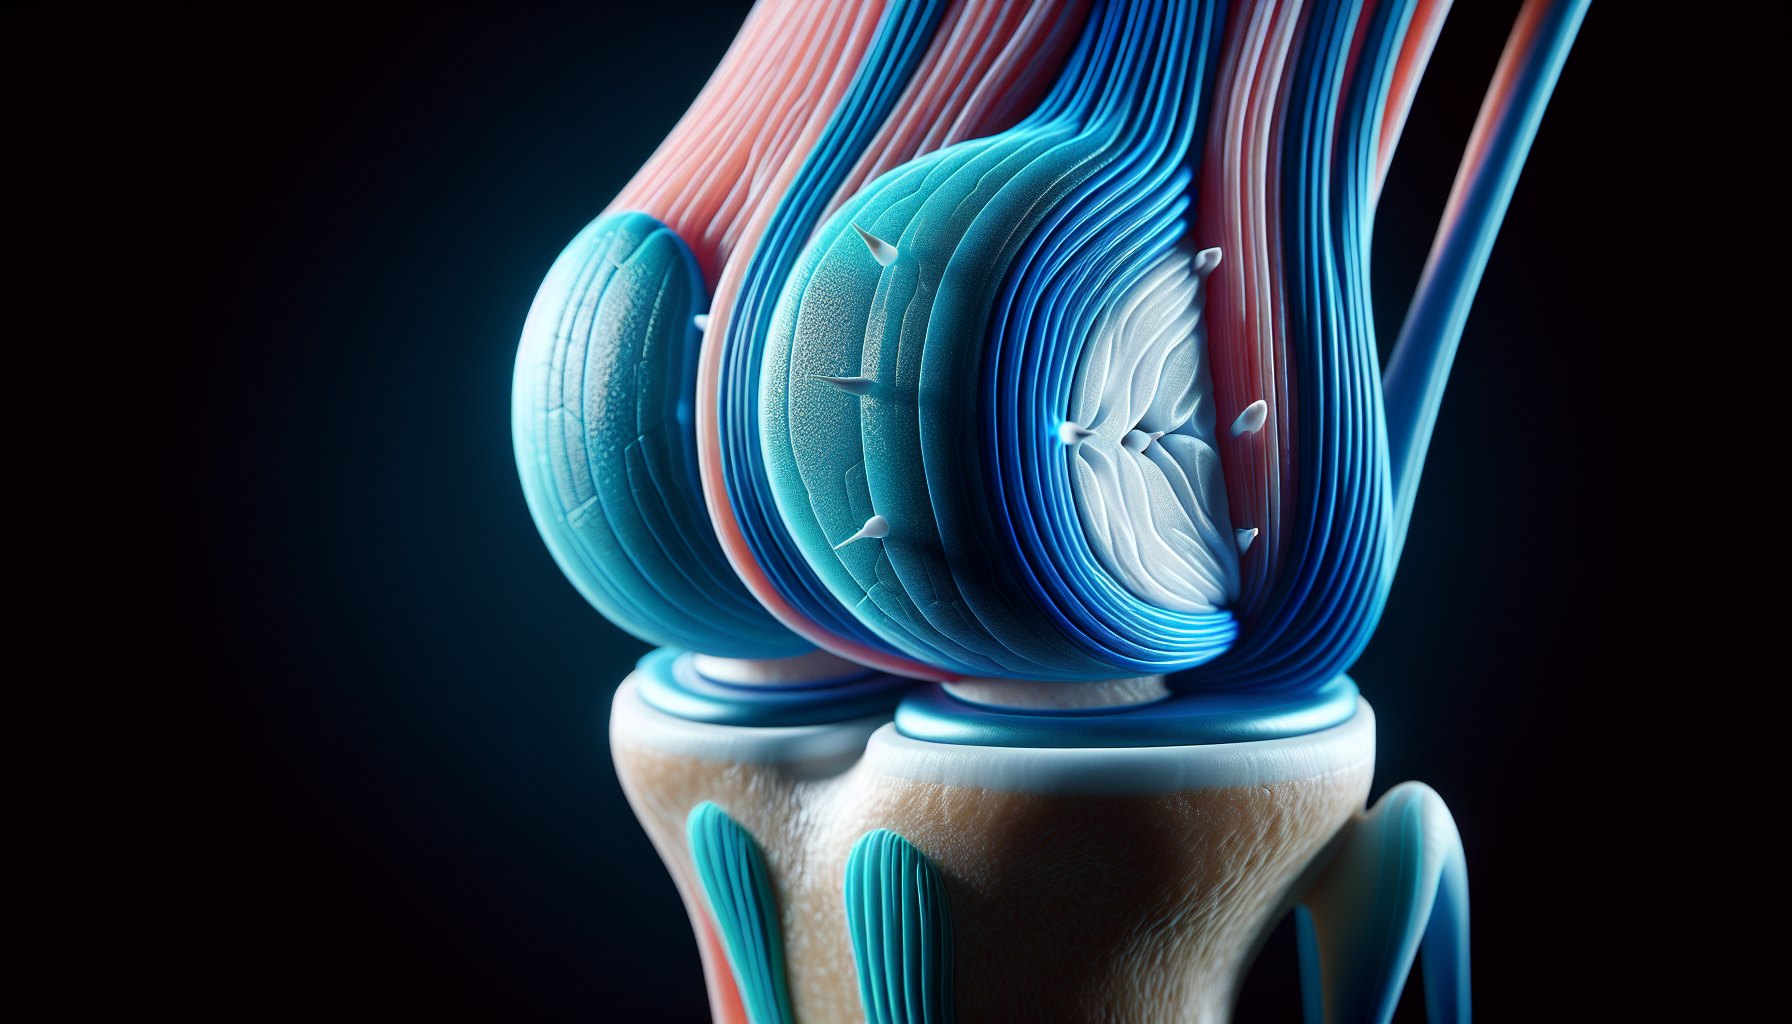 Illustration of a cross-section of the knee joint showing the meniscus and surrounding ligaments